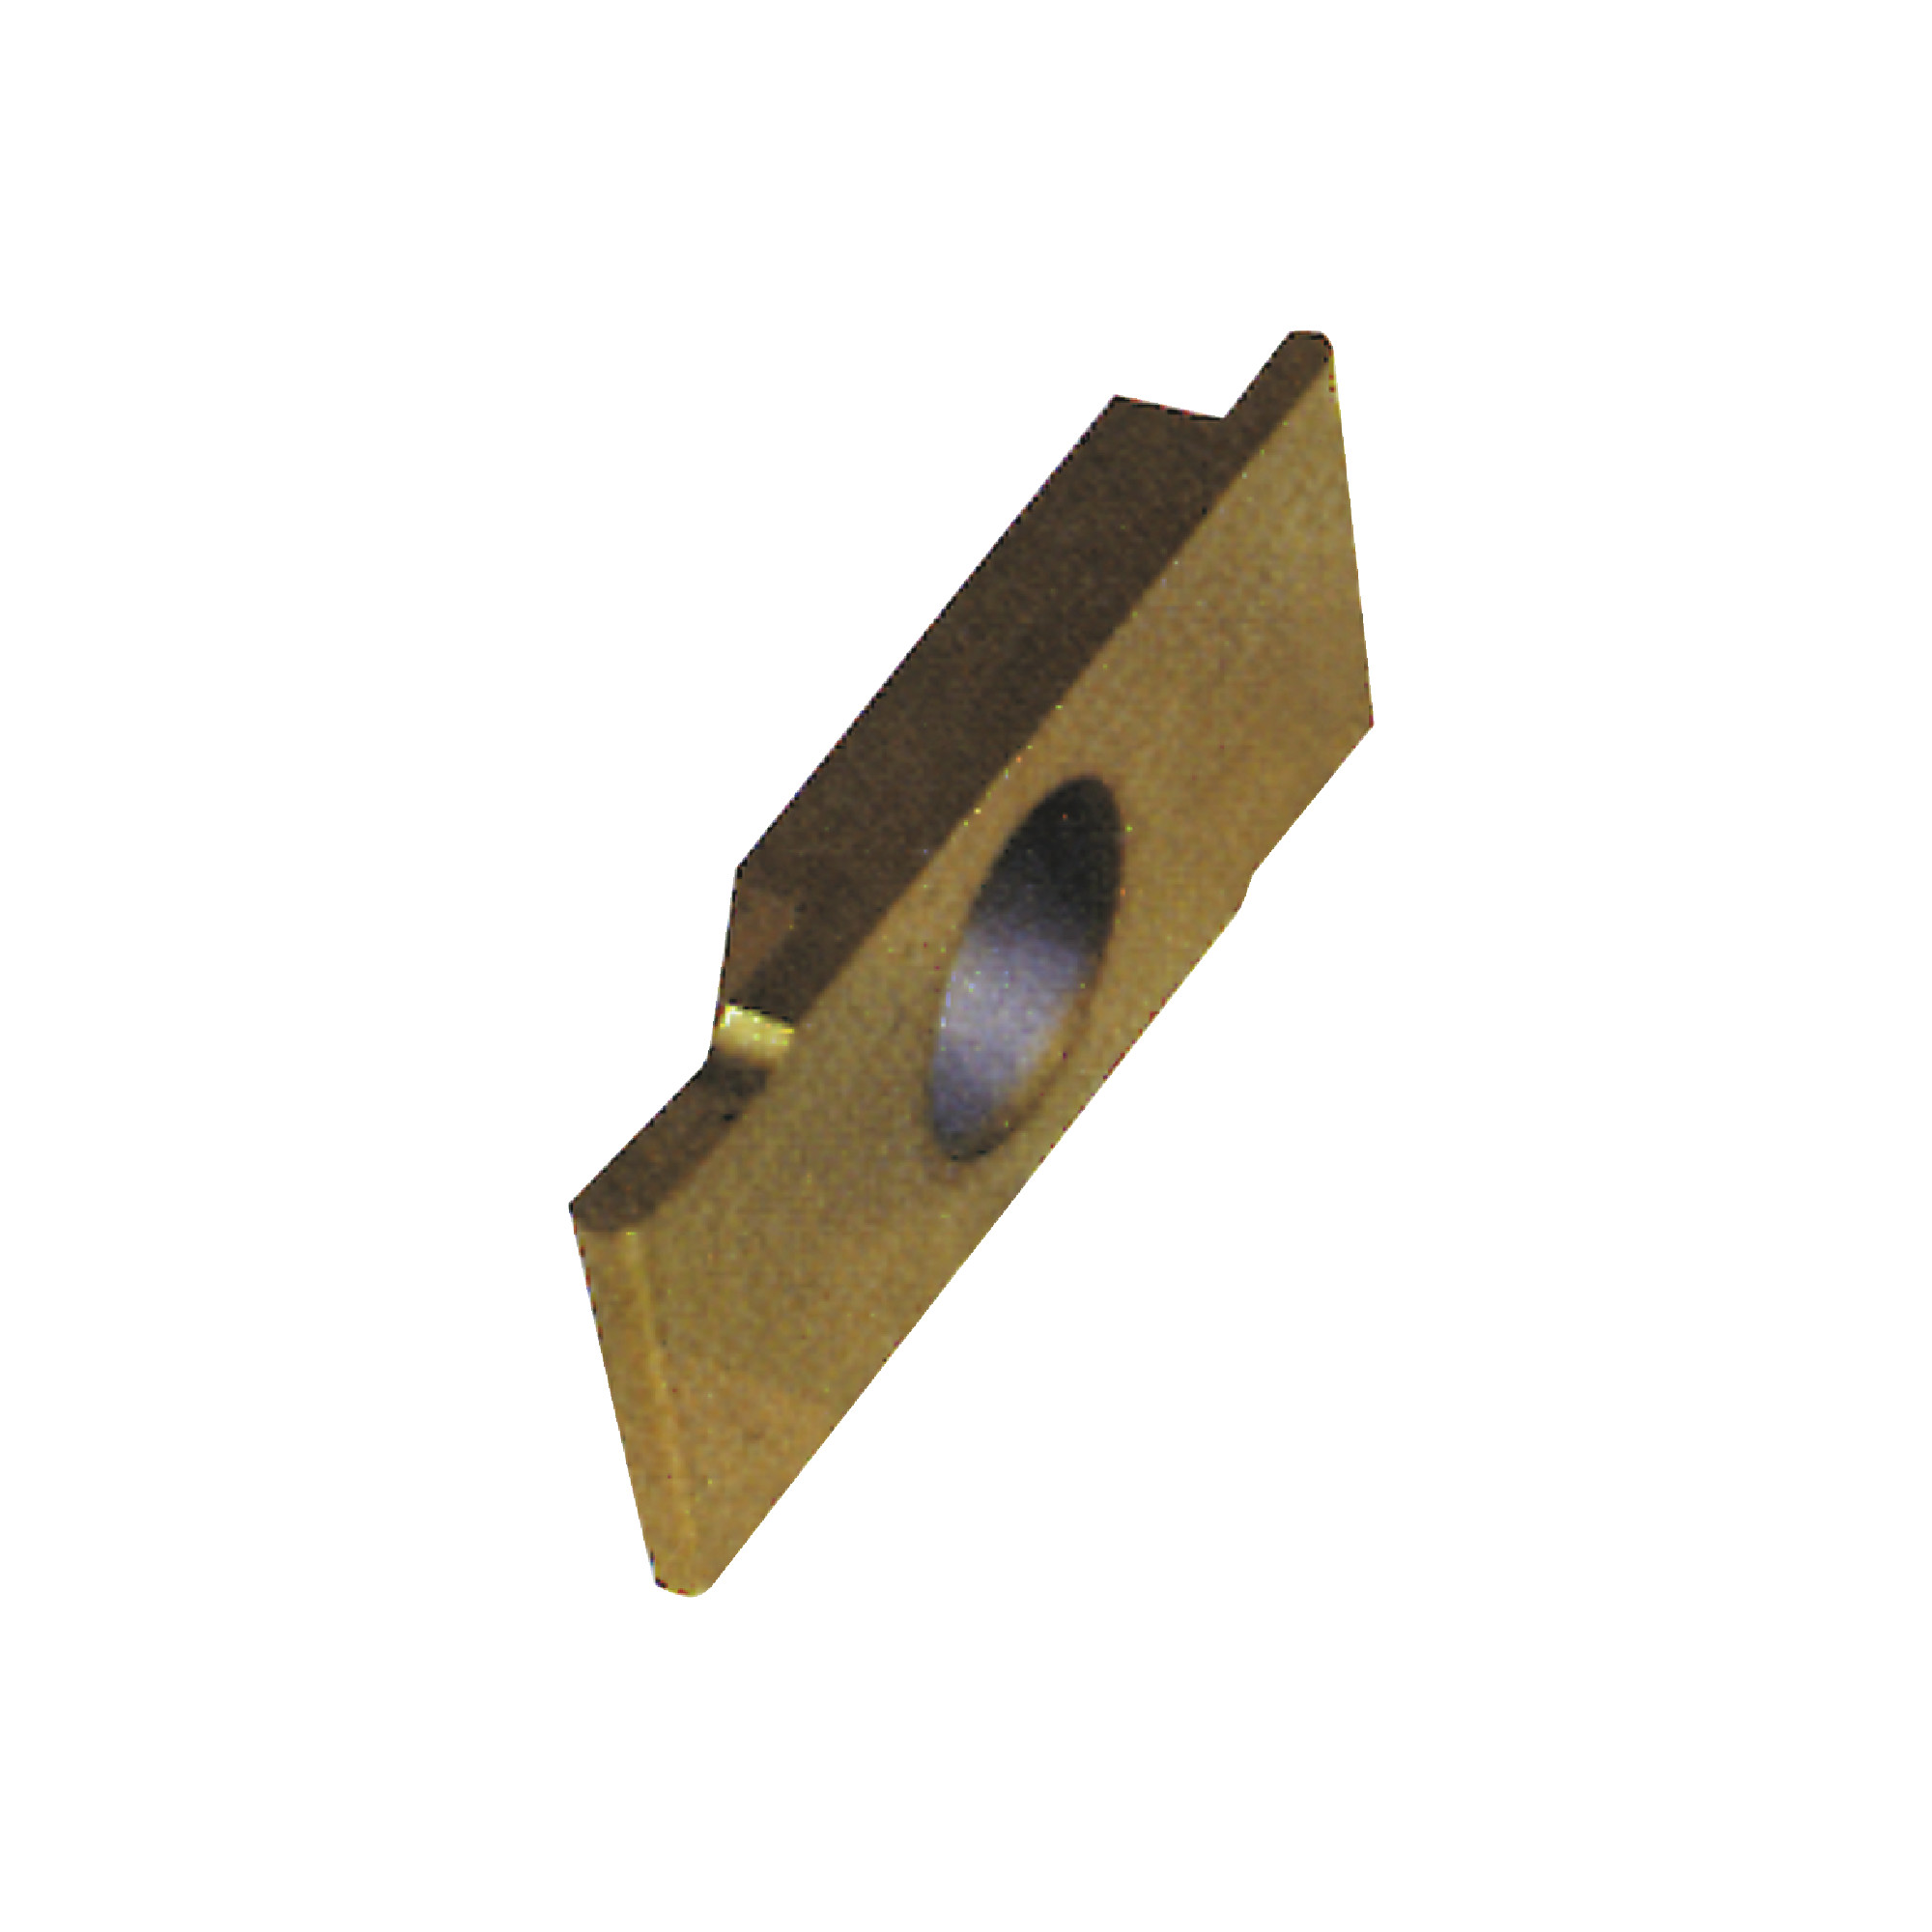 NIKCOLE - GIE-7-GR-1.5R C5-PV / Indexable Carbide Insert / 0.059" Cutting Width / Right Hand